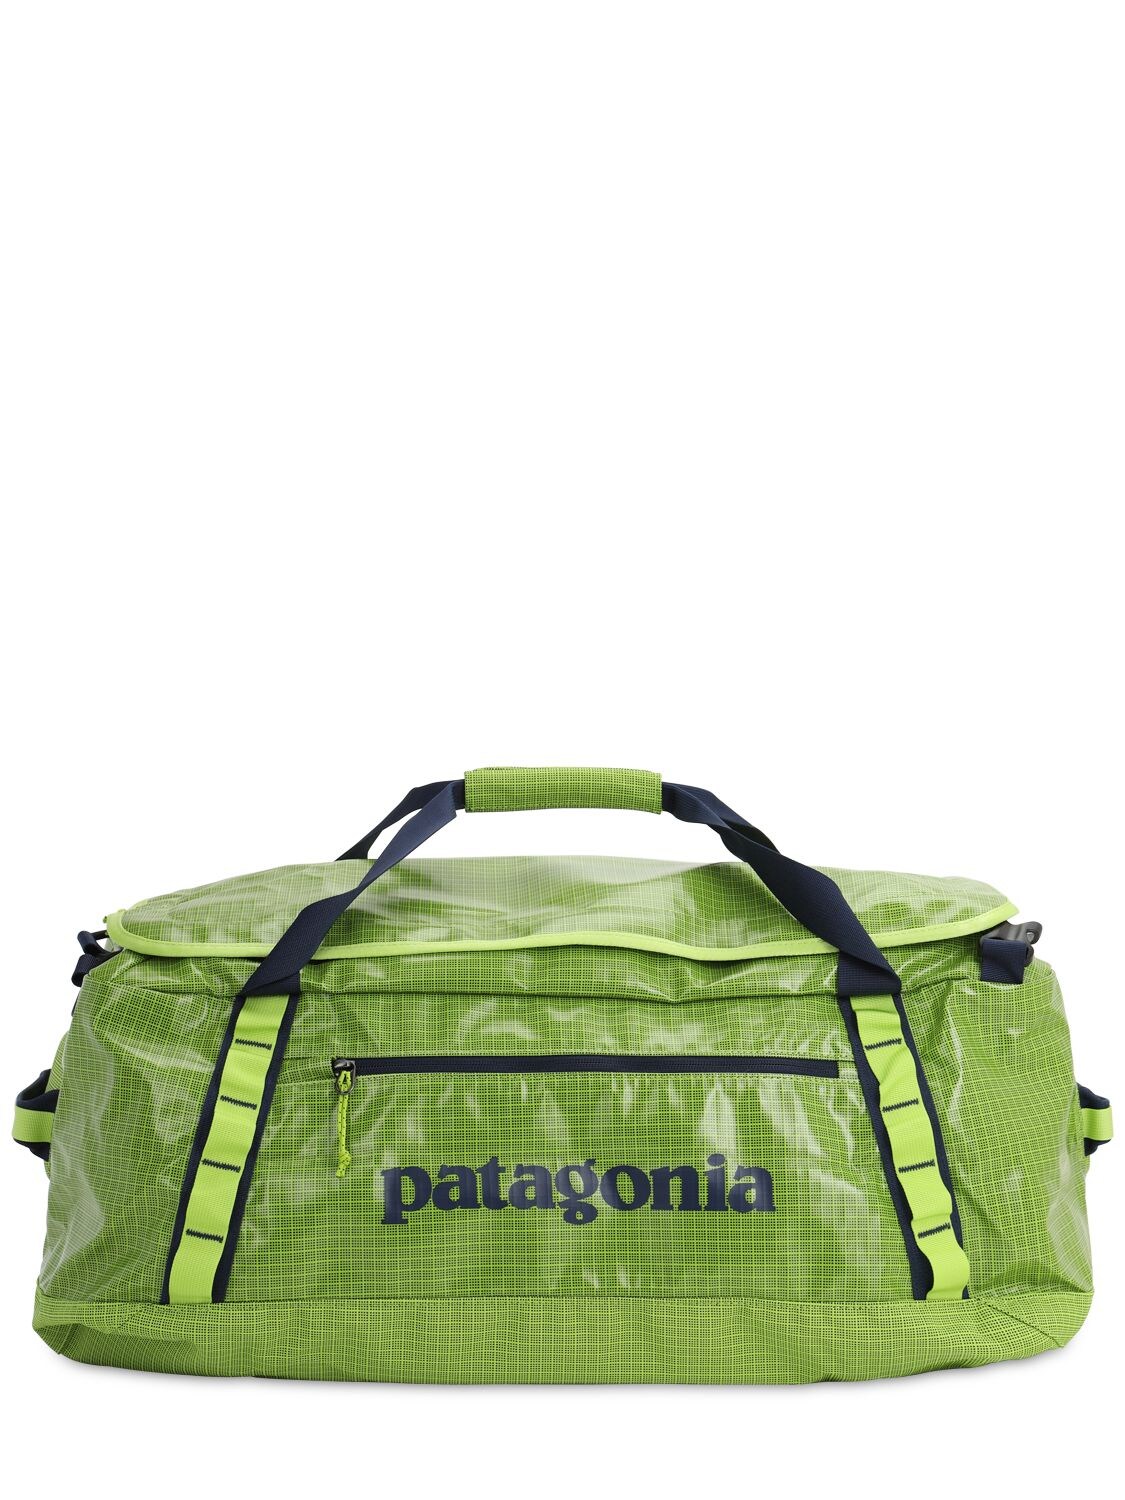 Patagonia 55l Black Hole Duffle Bag In Lime Green